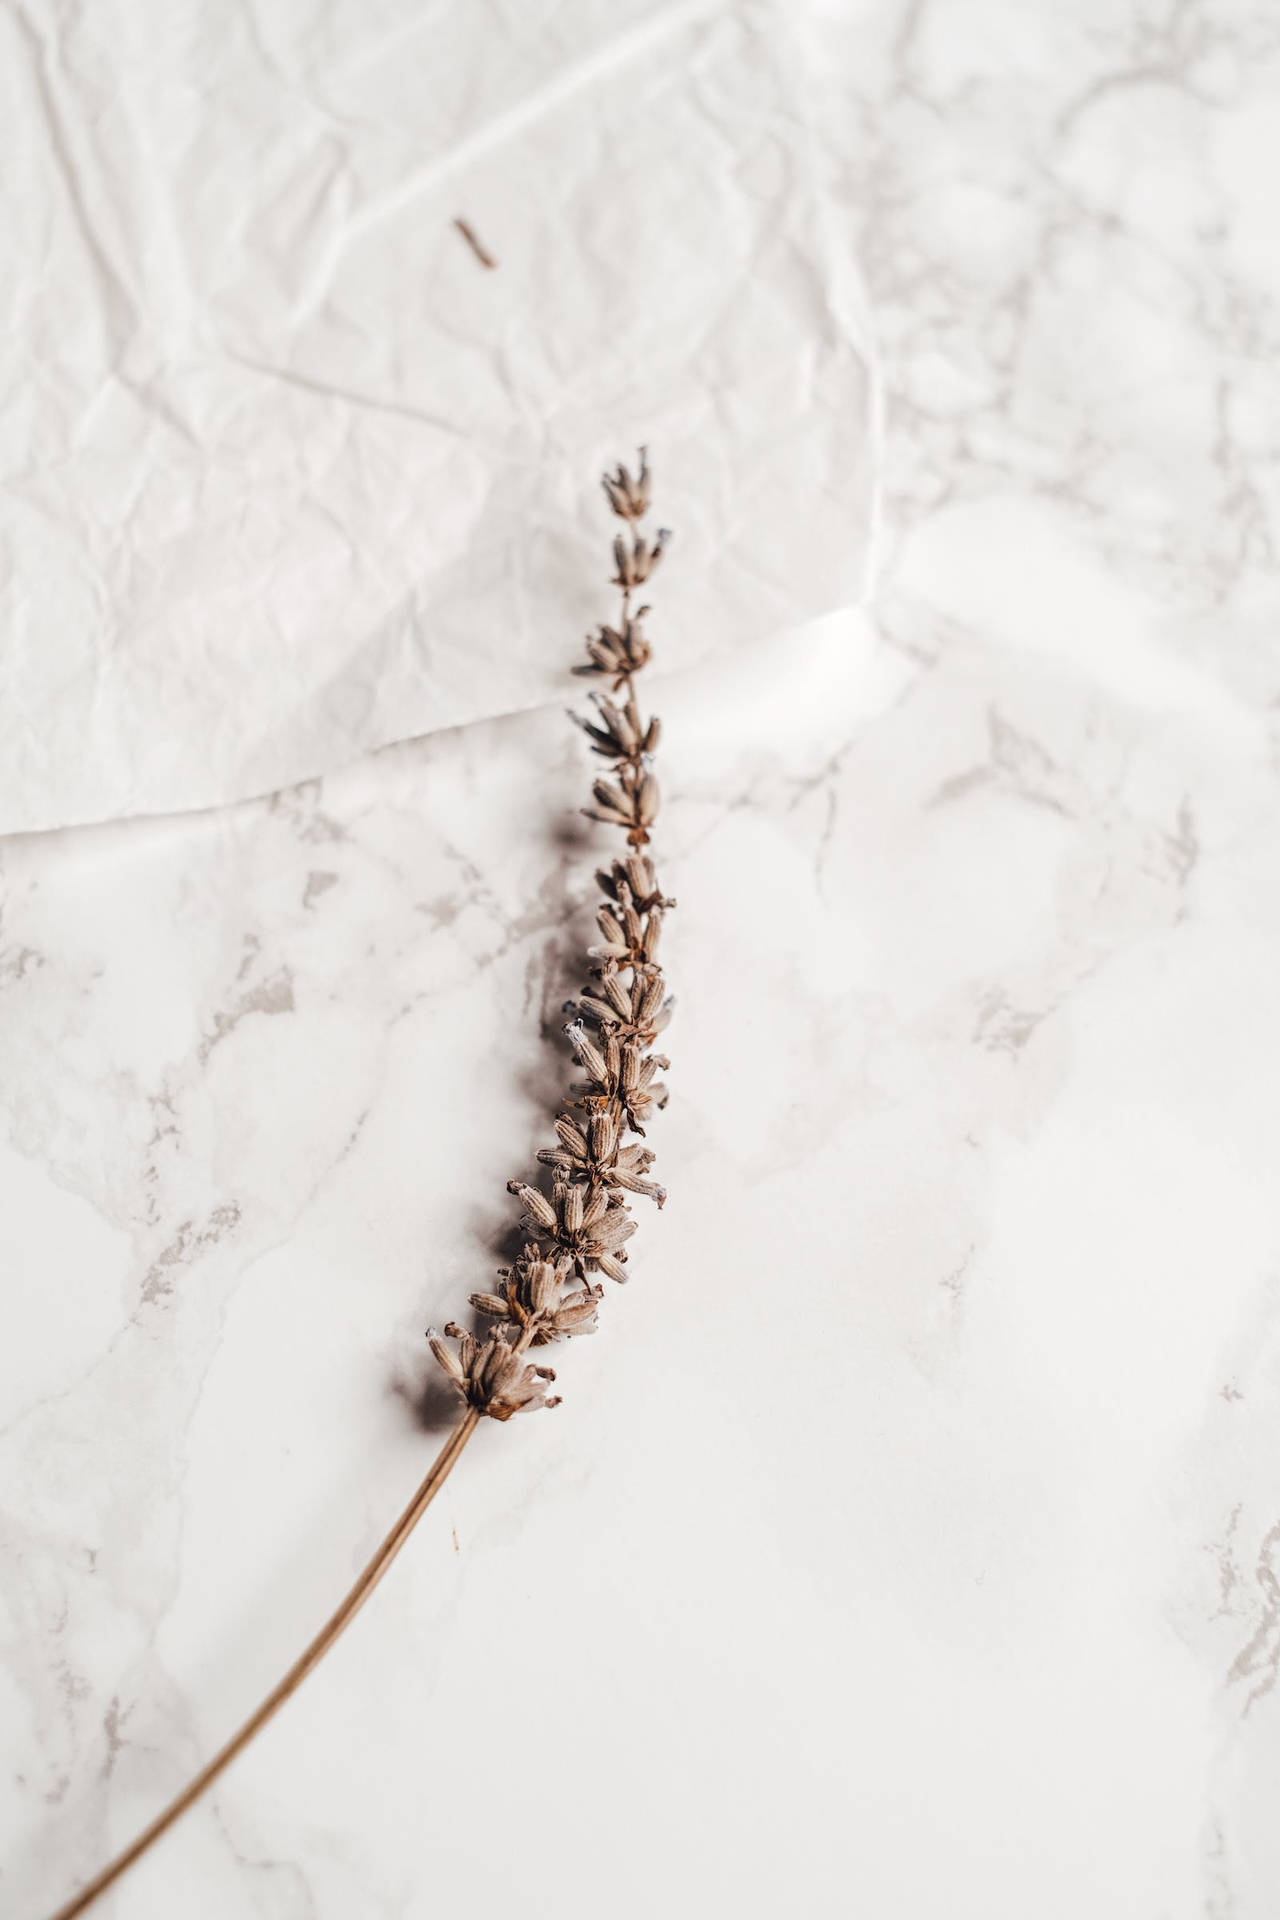 Dried Flower On Aesthetic Marble Surface Wallpaper